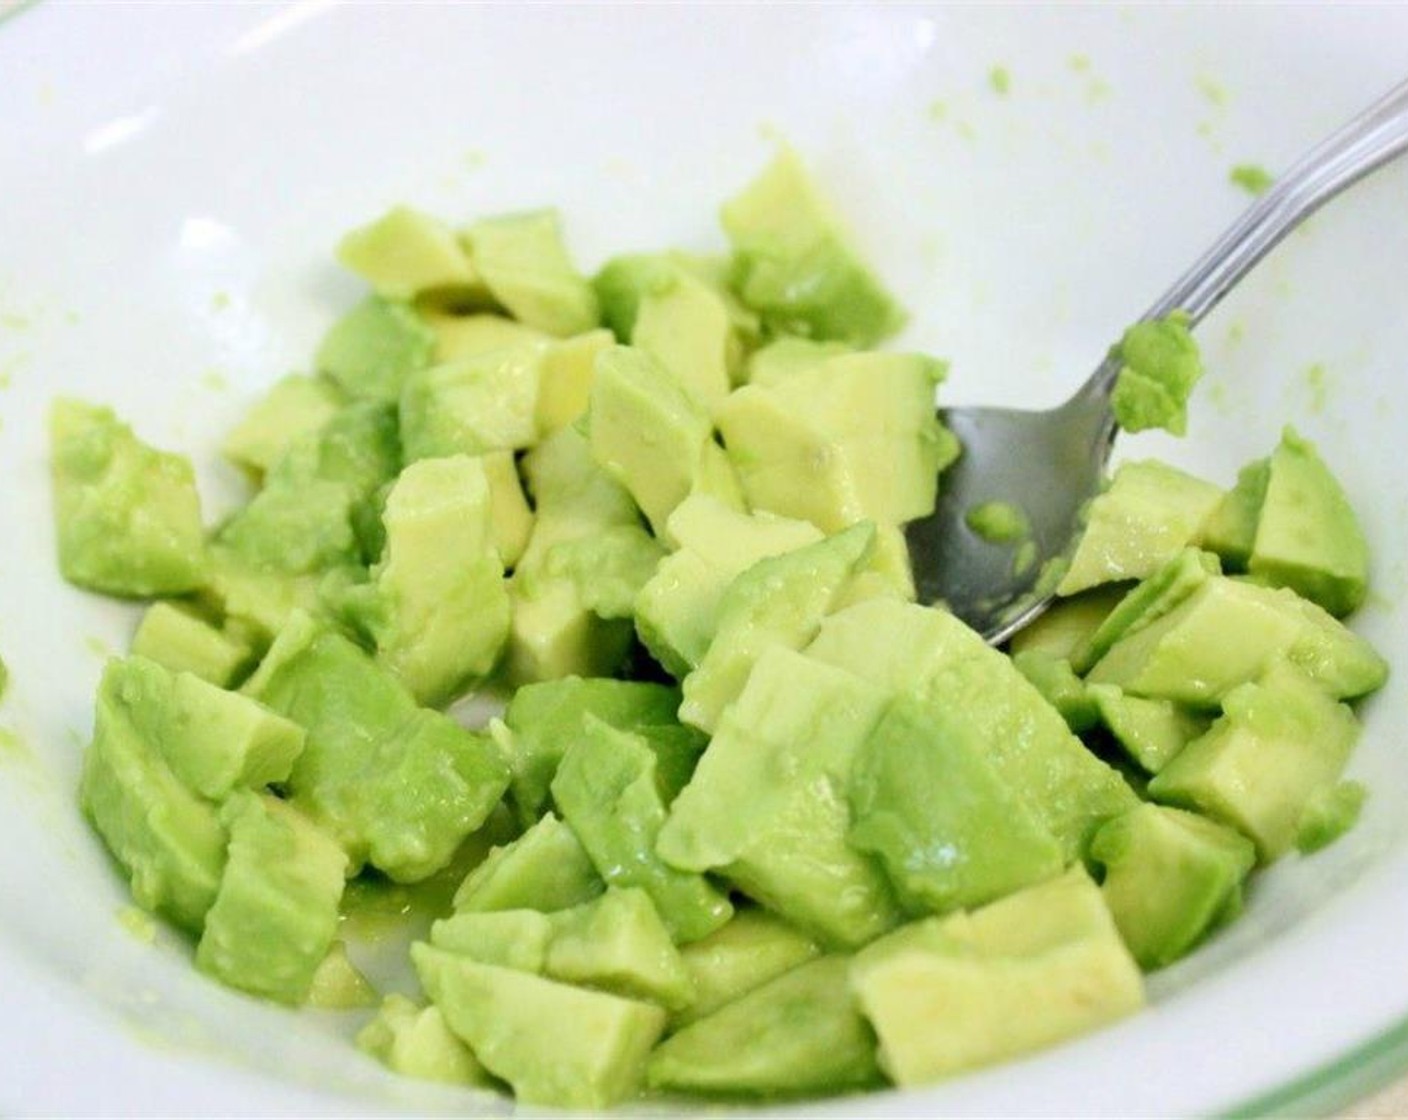 step 5 Add the juice from Lime (1/2) into the avocado, and stir gently to combine.